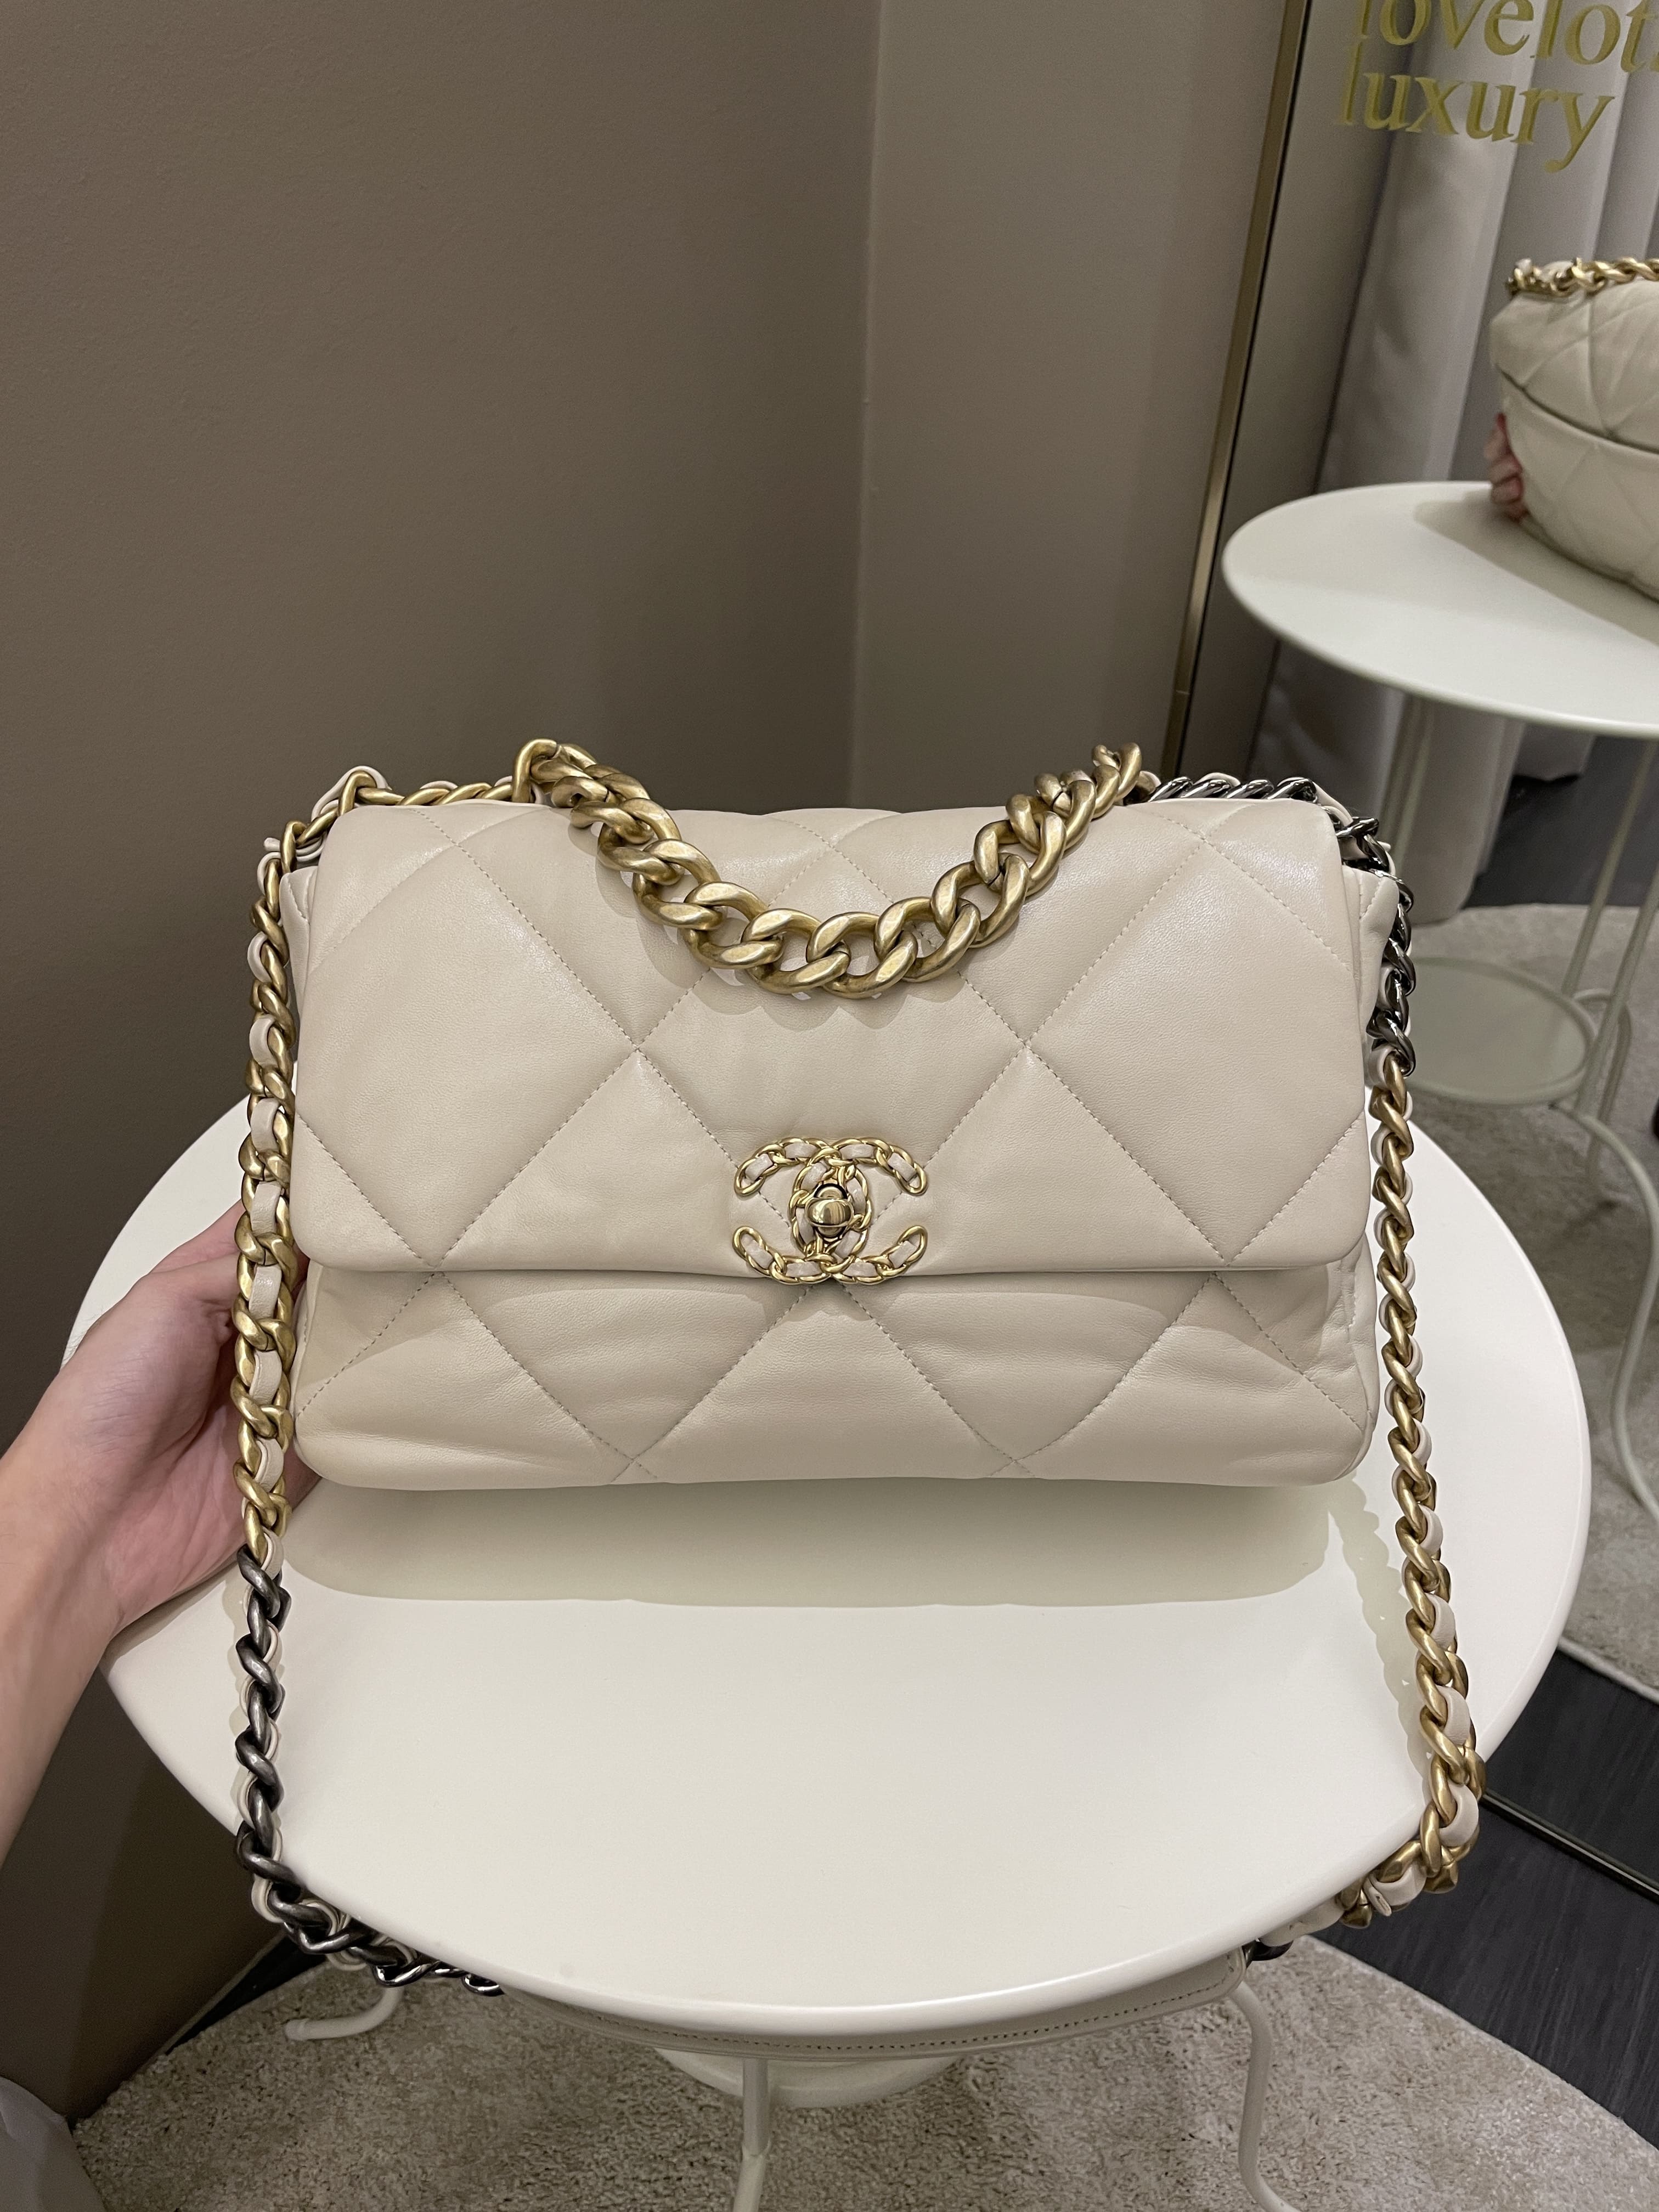 CHANEL 19 Small Flap Lambskin Leather Shoulder Bag White